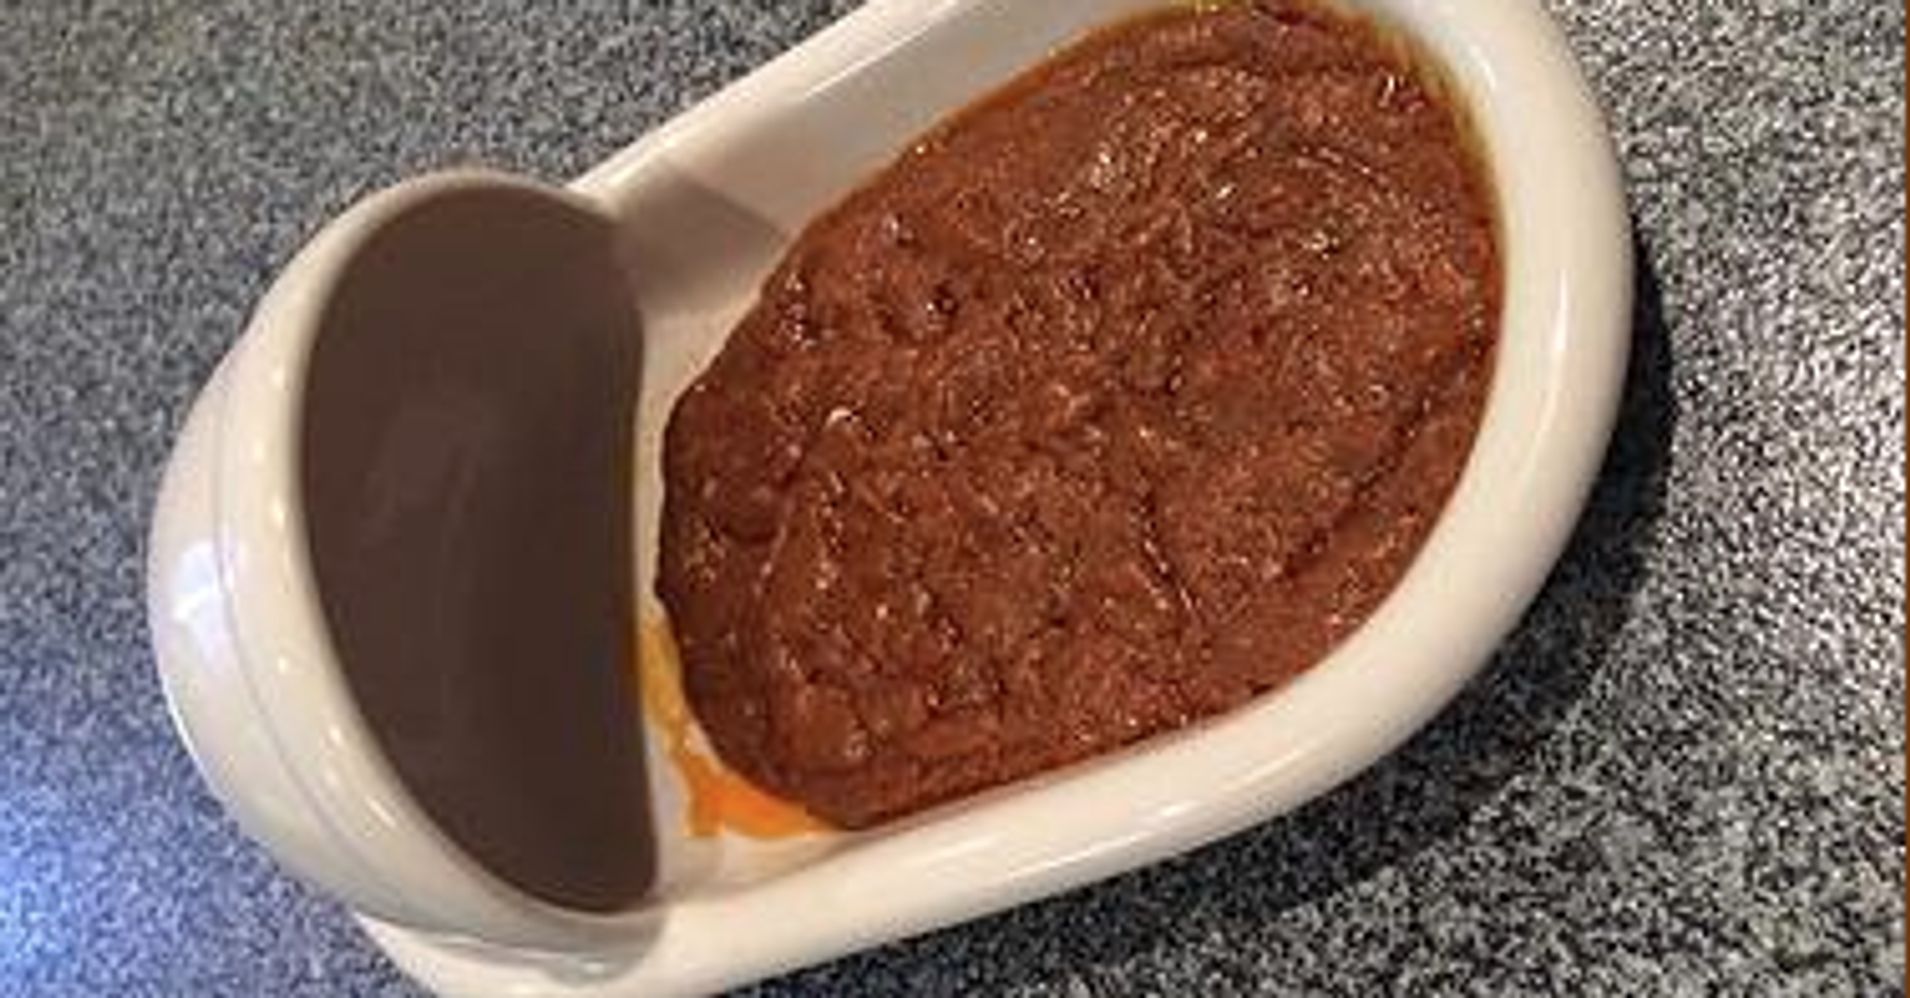 Japanese Restaurant Selling PooFlavored Curry HuffPost